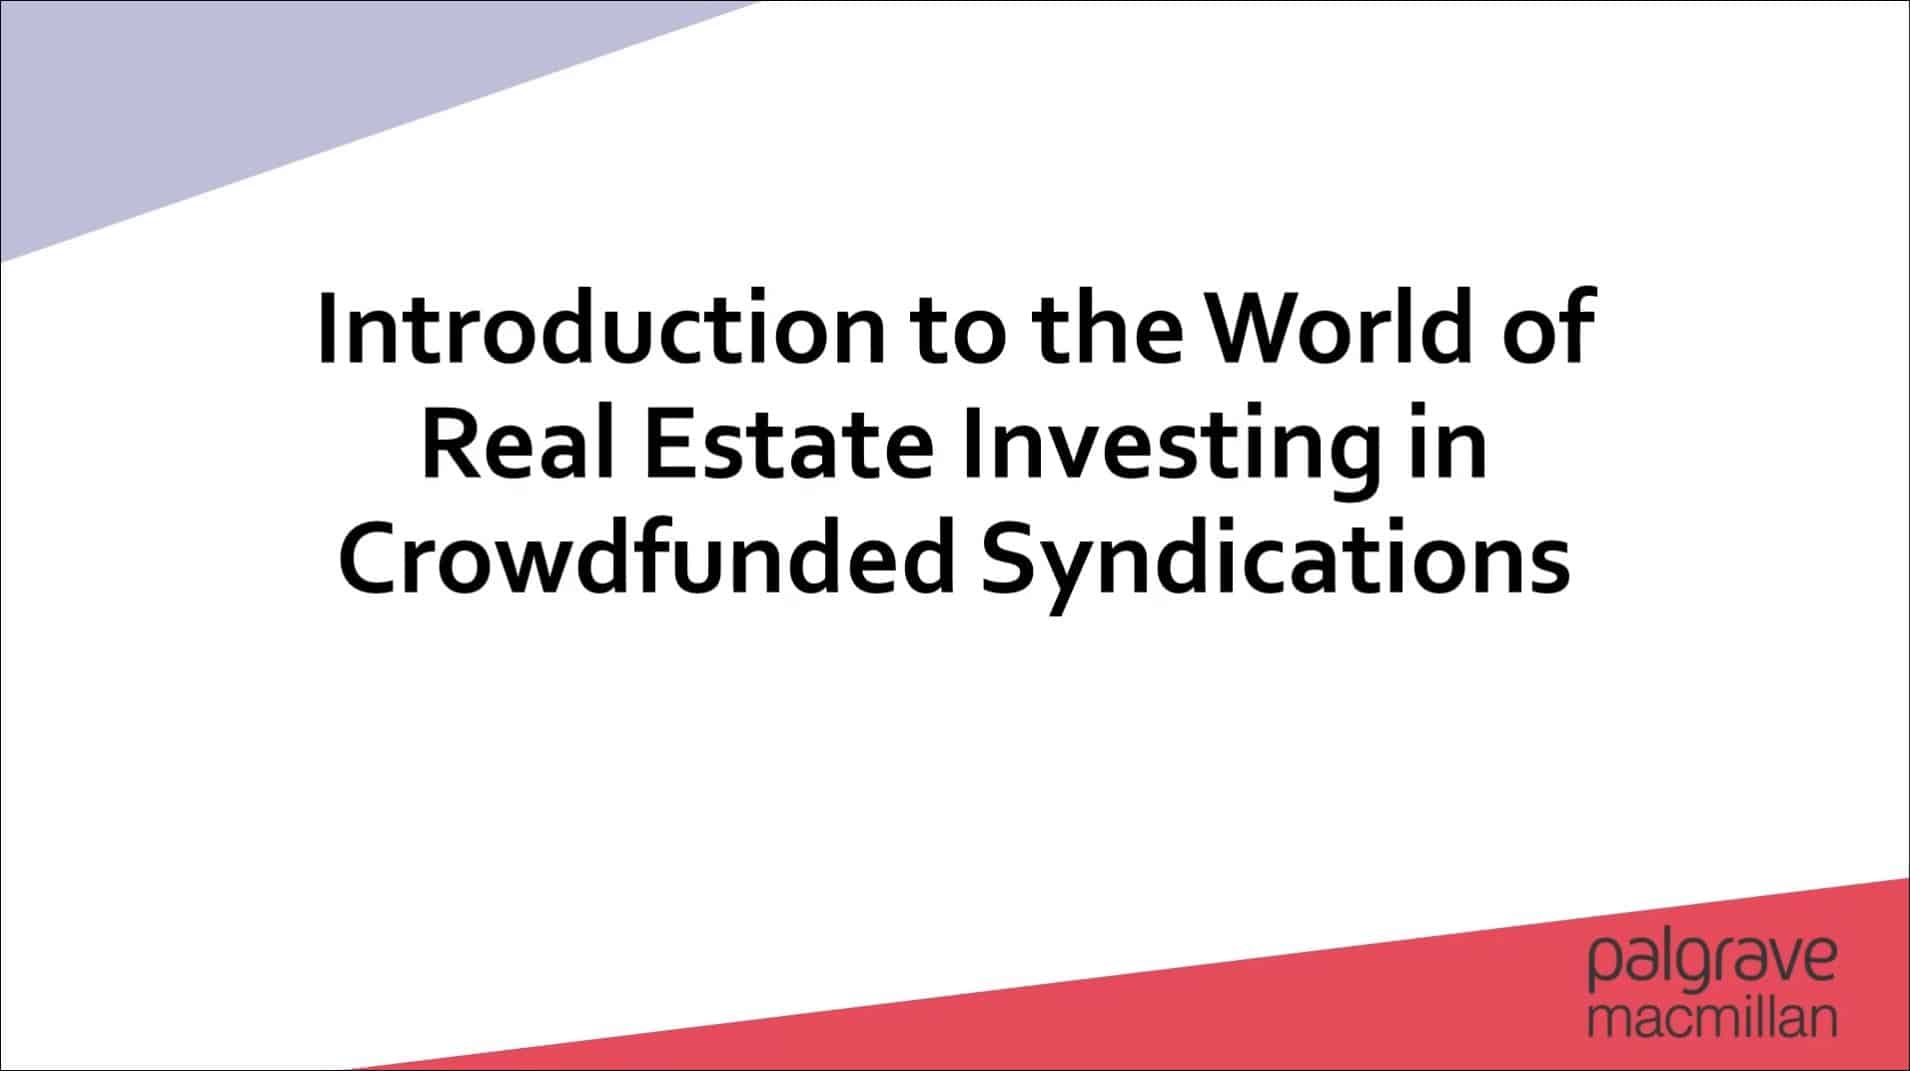 Introduction to the world of real estate investing in crowdfunded syndications